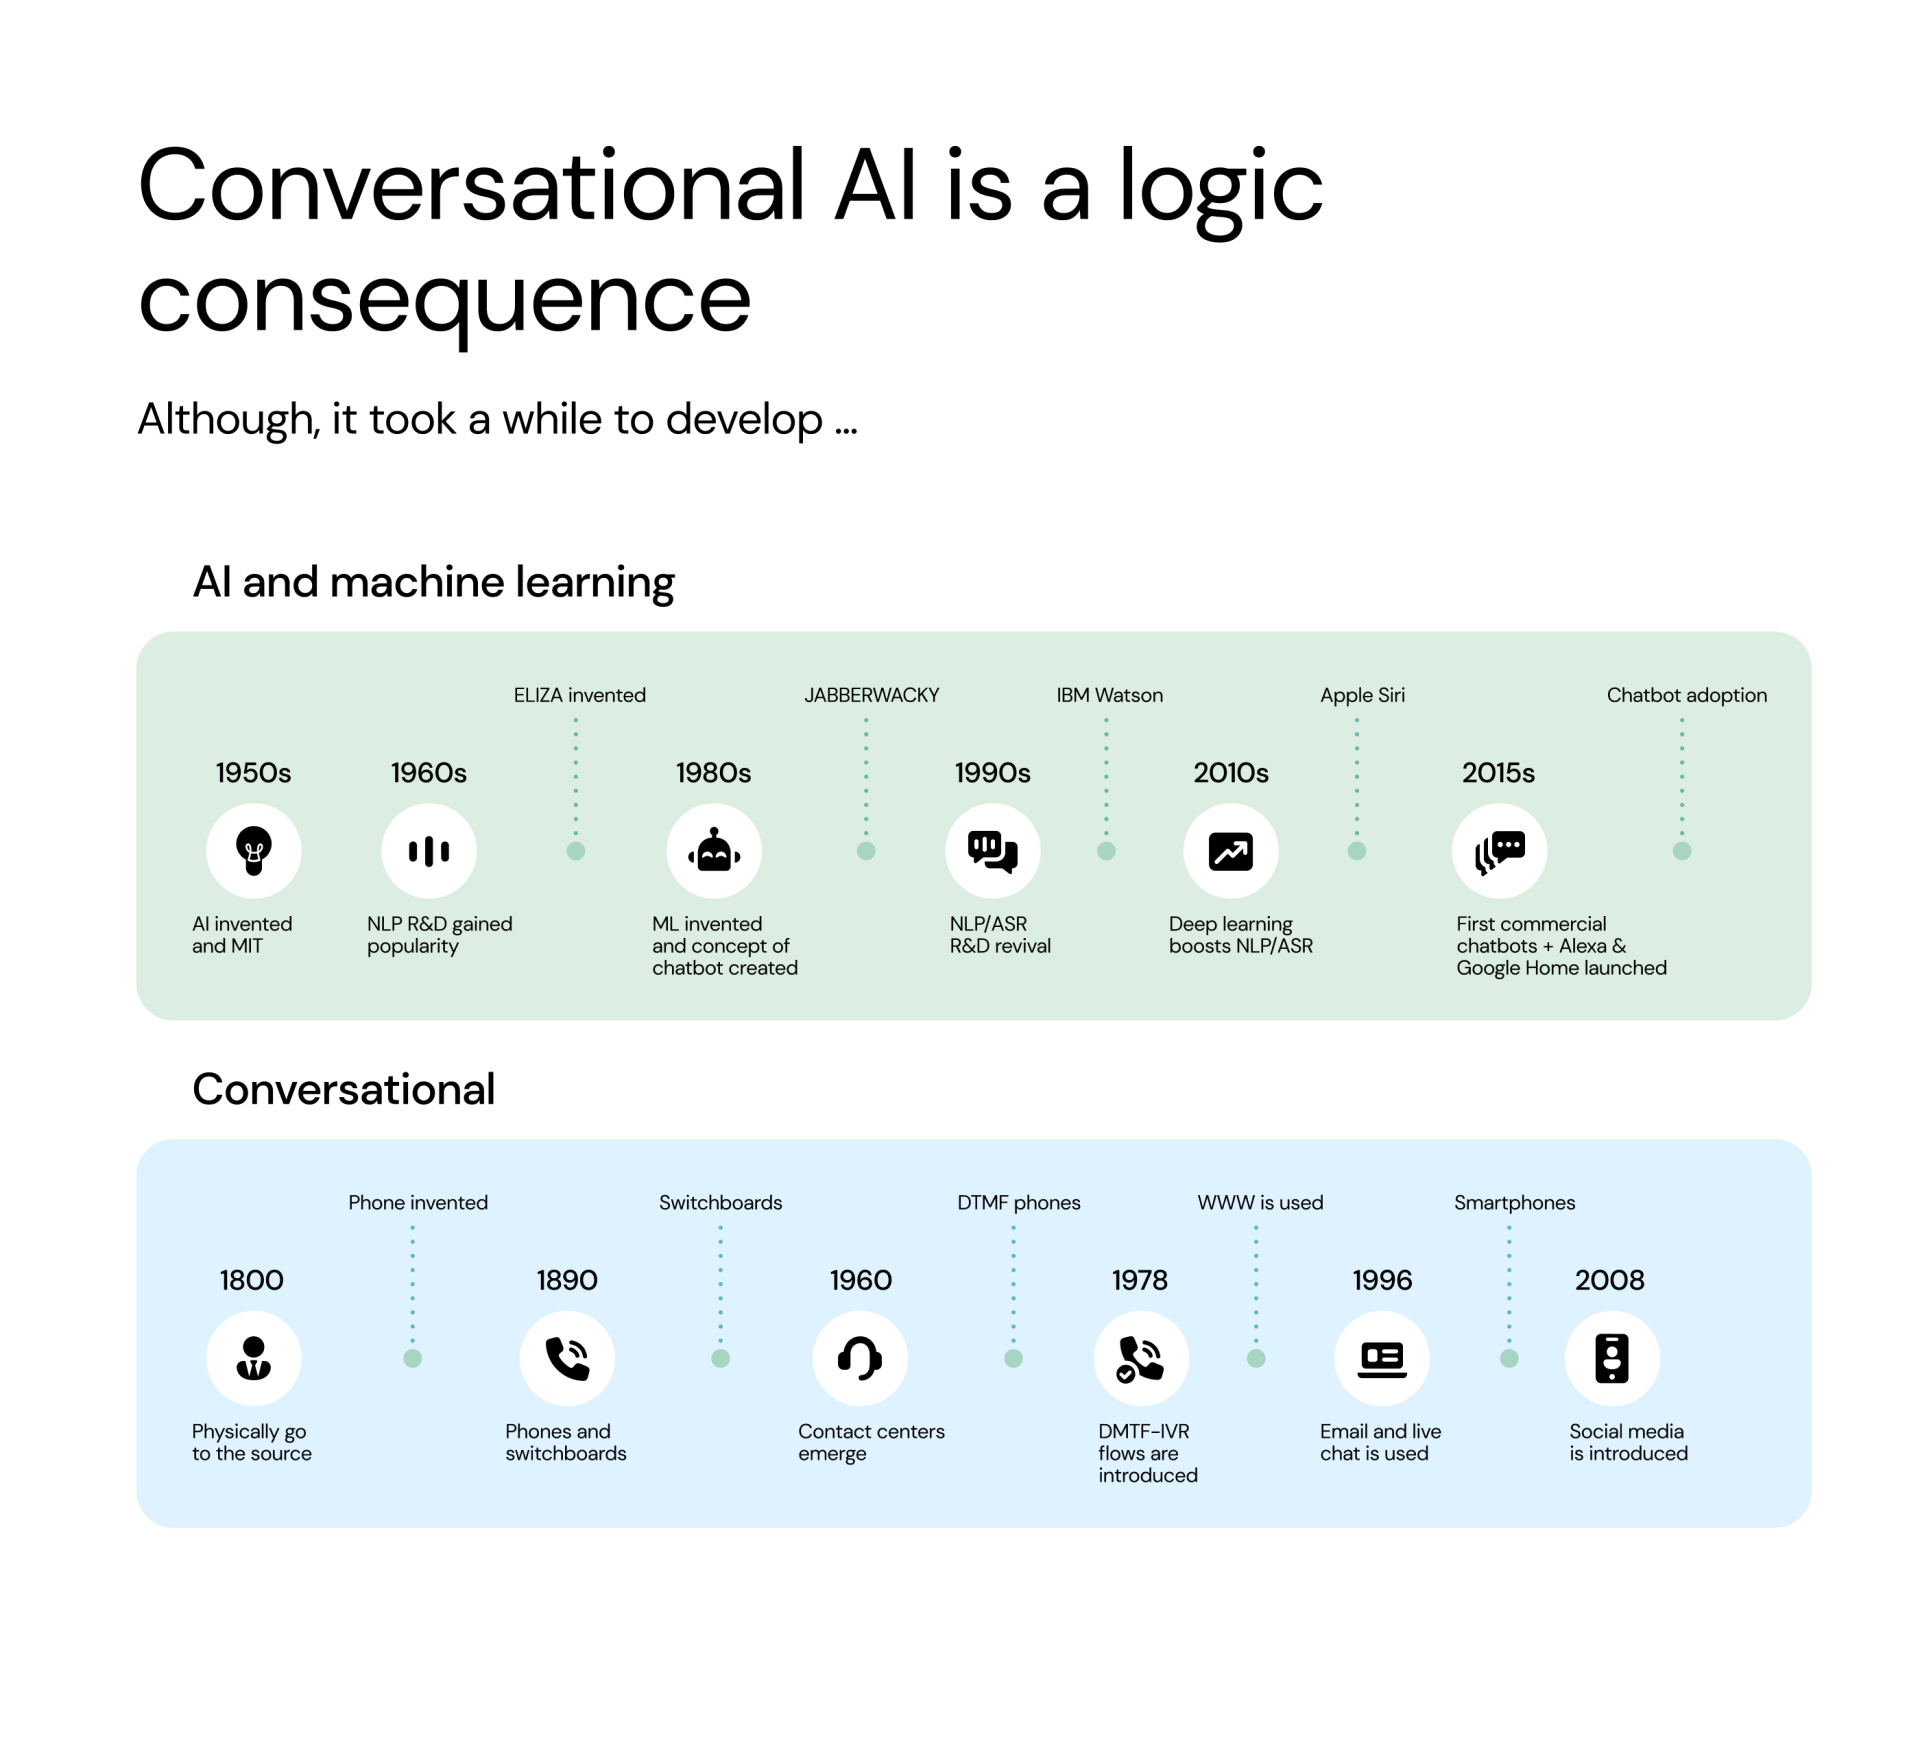 Image showing the evolution of AI